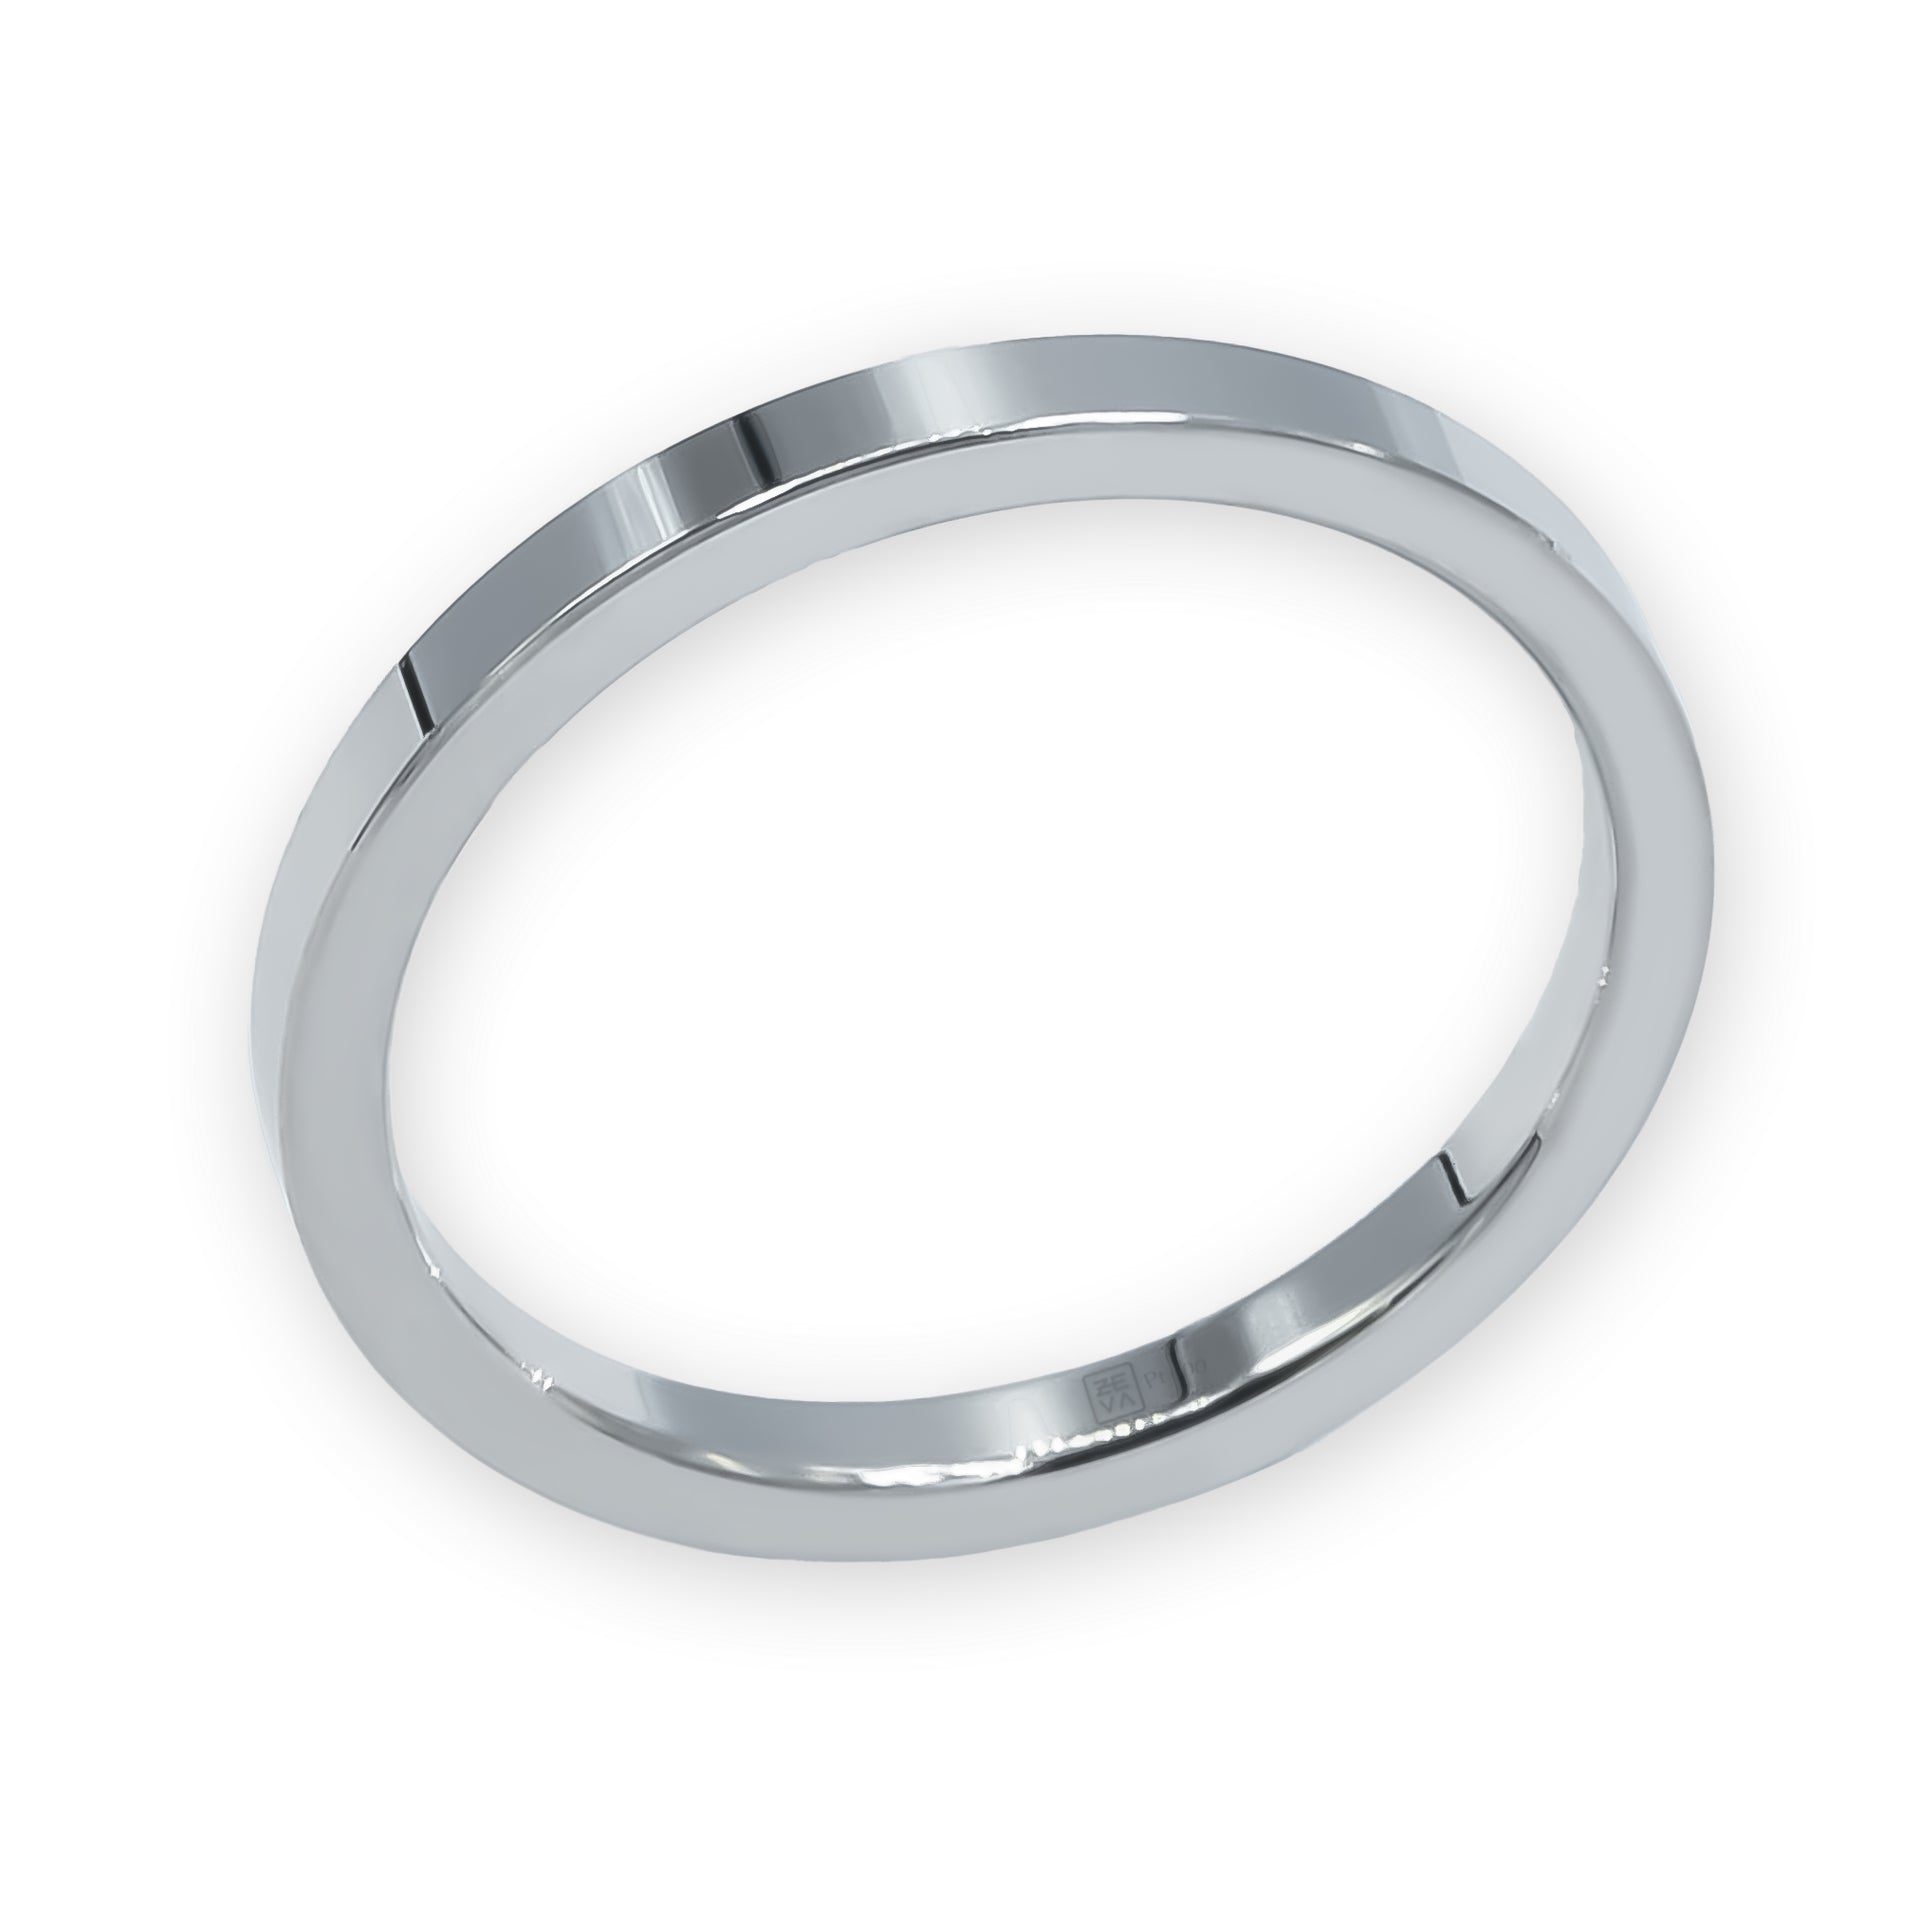 Ring EARTH IS ROUND 2mm flat profile platinum 600